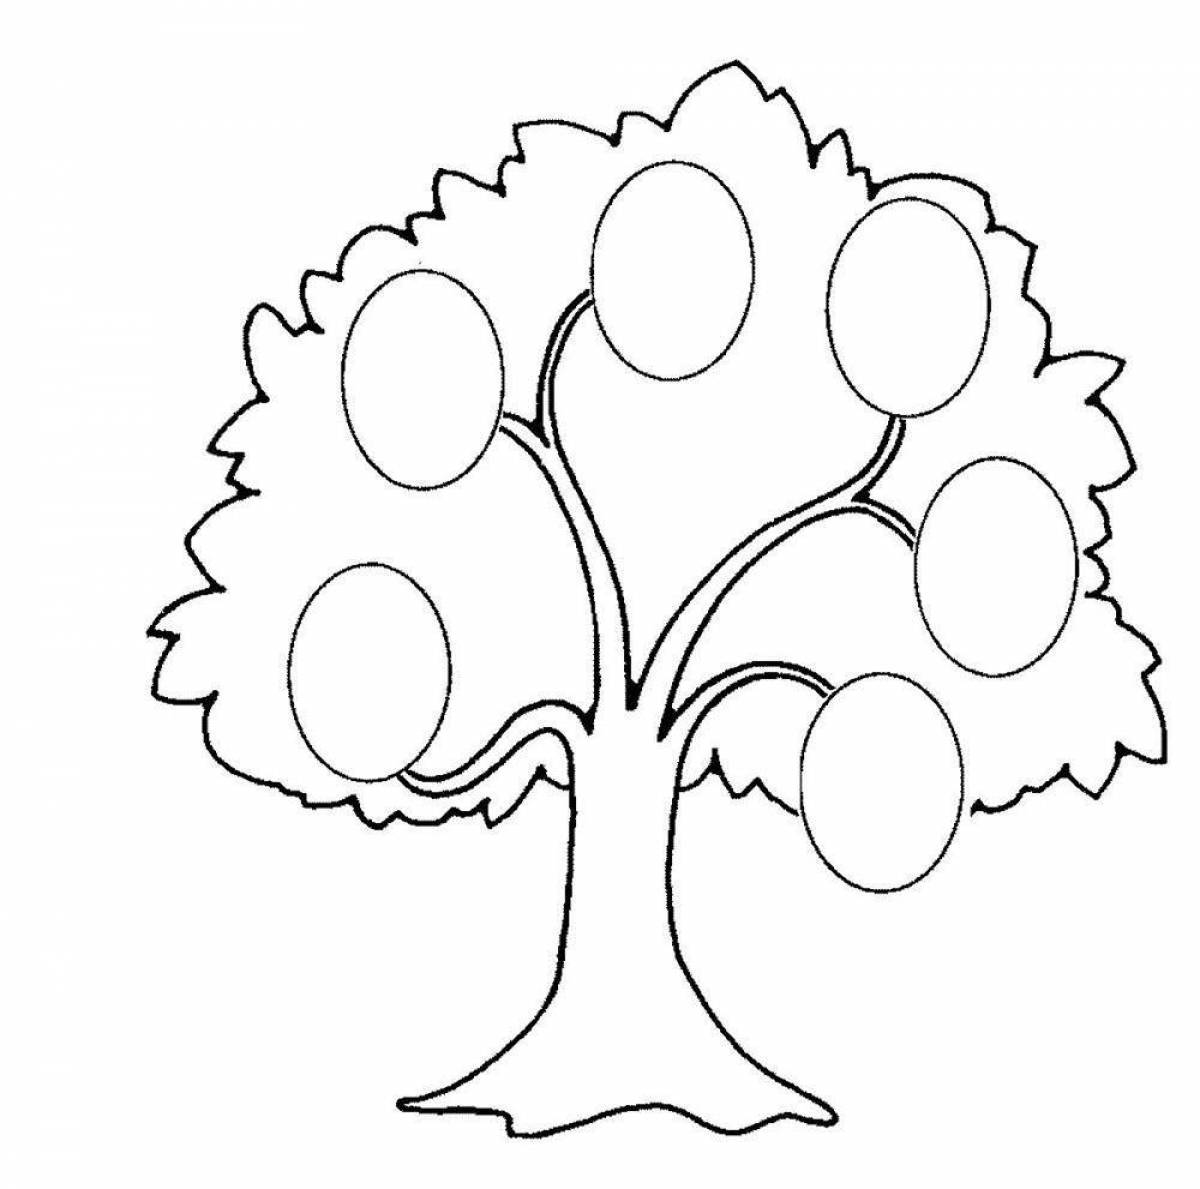 Magic tree coloring book for 3-4 year olds